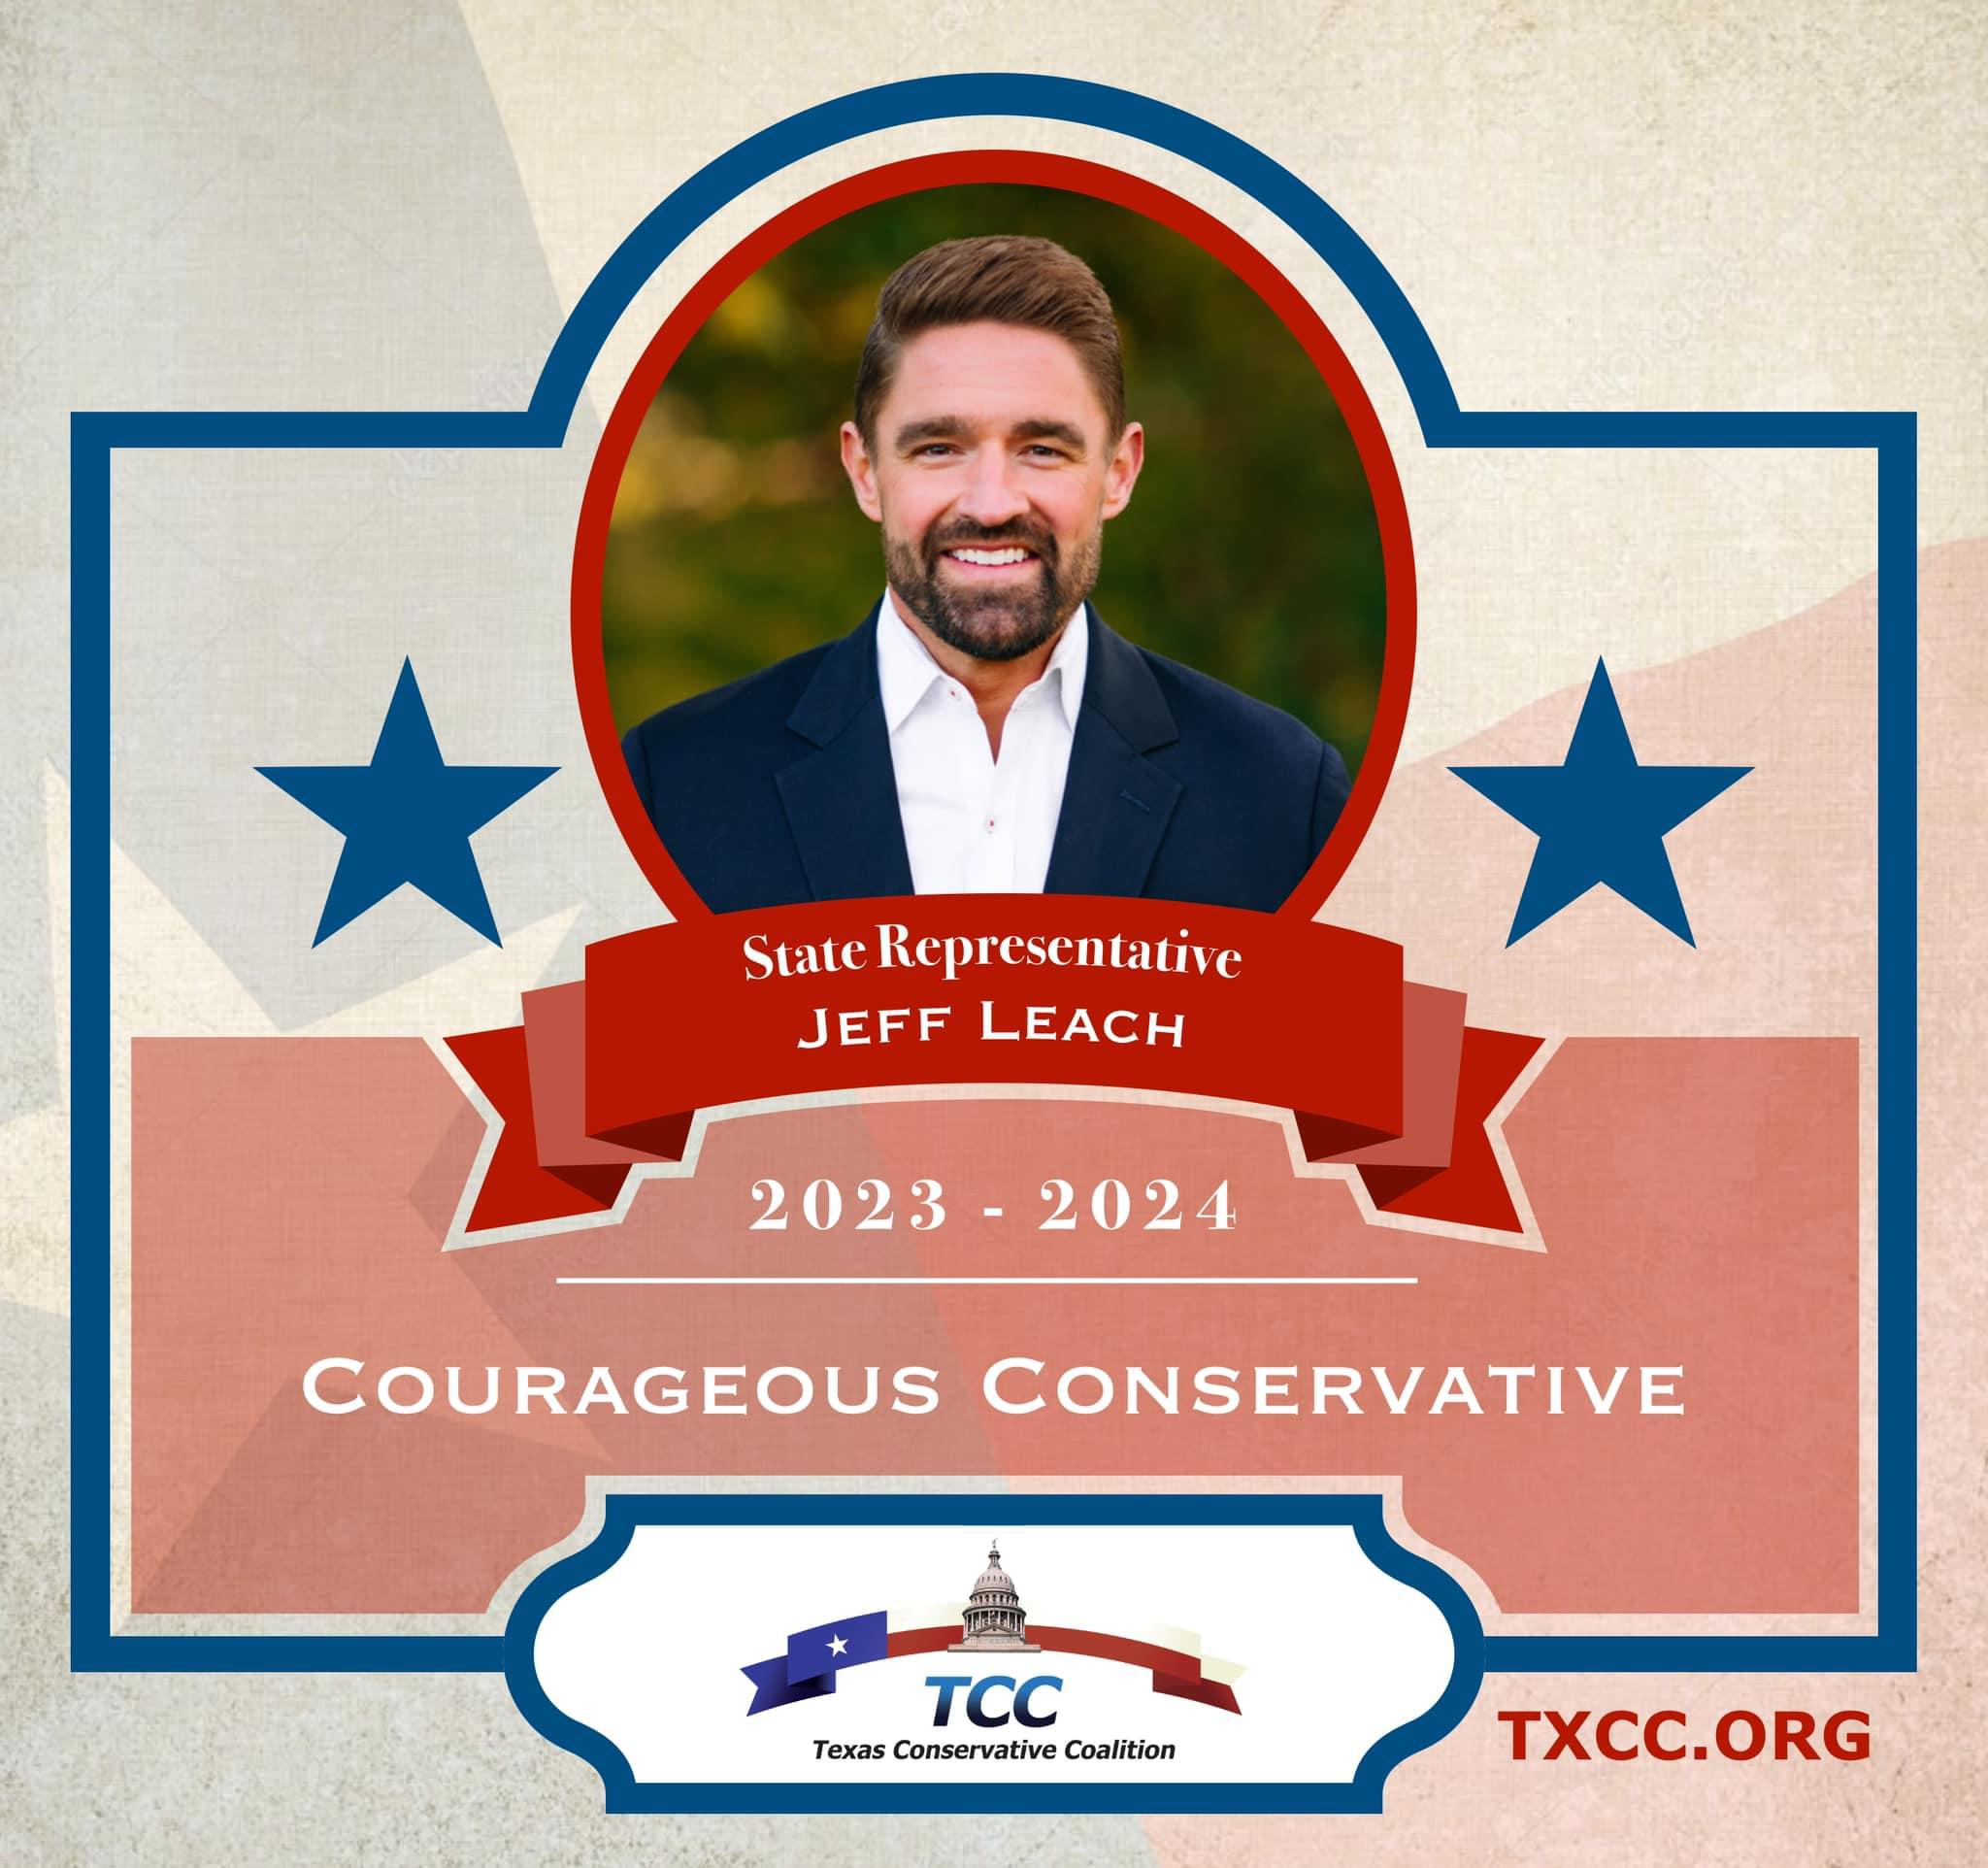 Recognized by TCC as a Courageous Conservative!